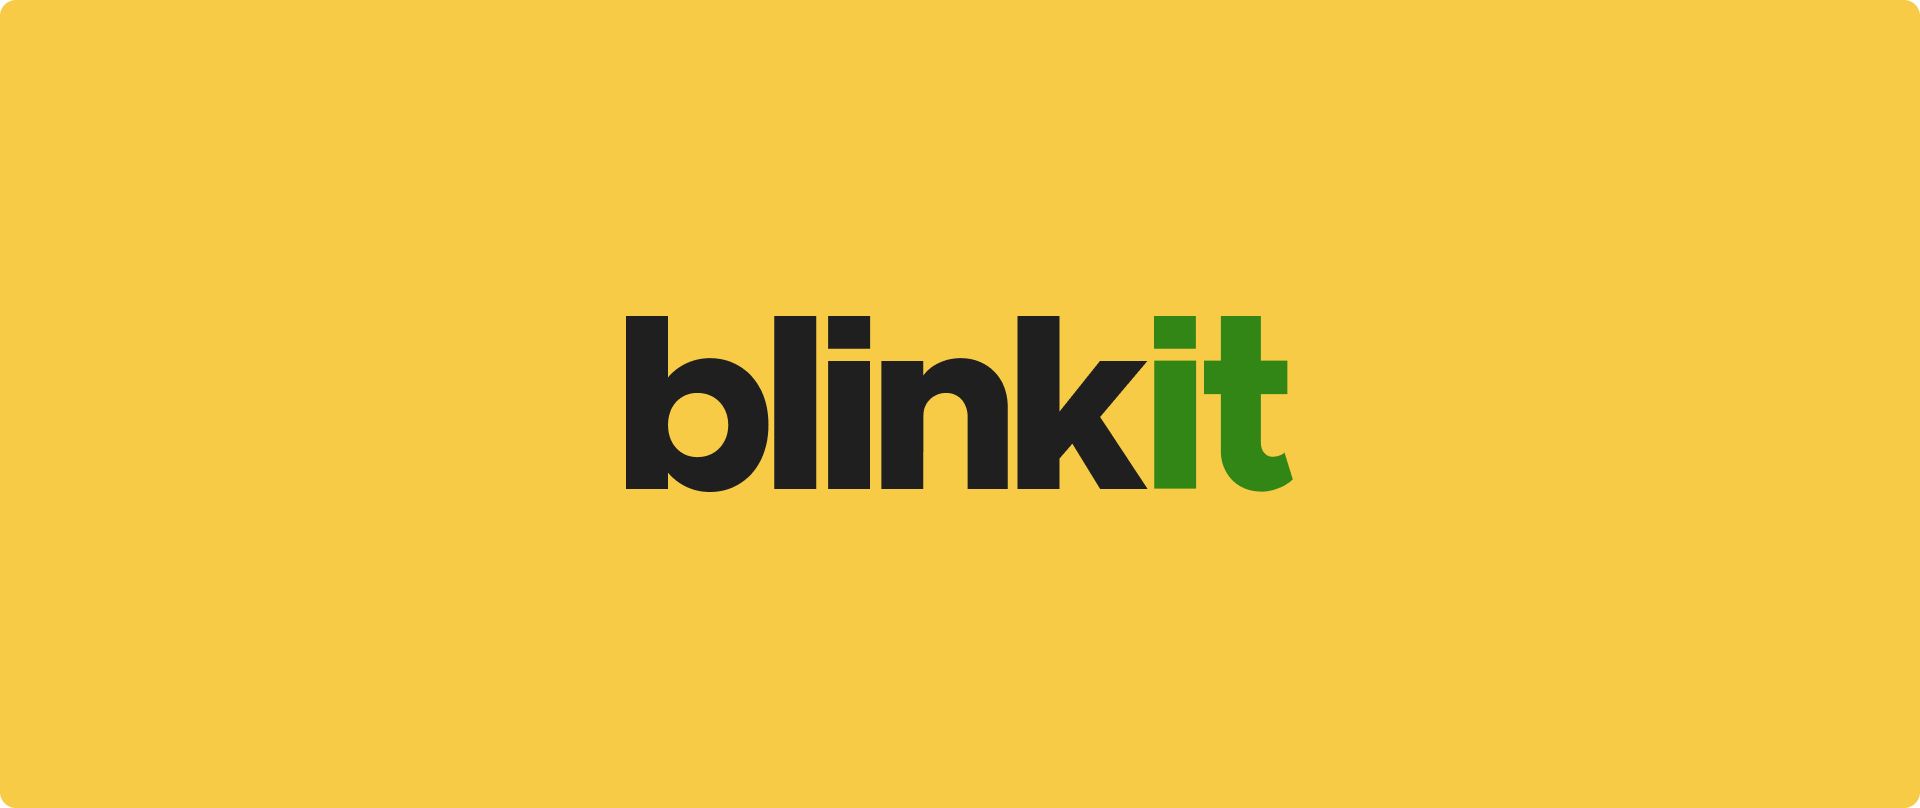 Is Blinkit not working? Explore troubleshooting tips and find the best Blinkit alternatives for seamless grocery shopping. Get back on track today!